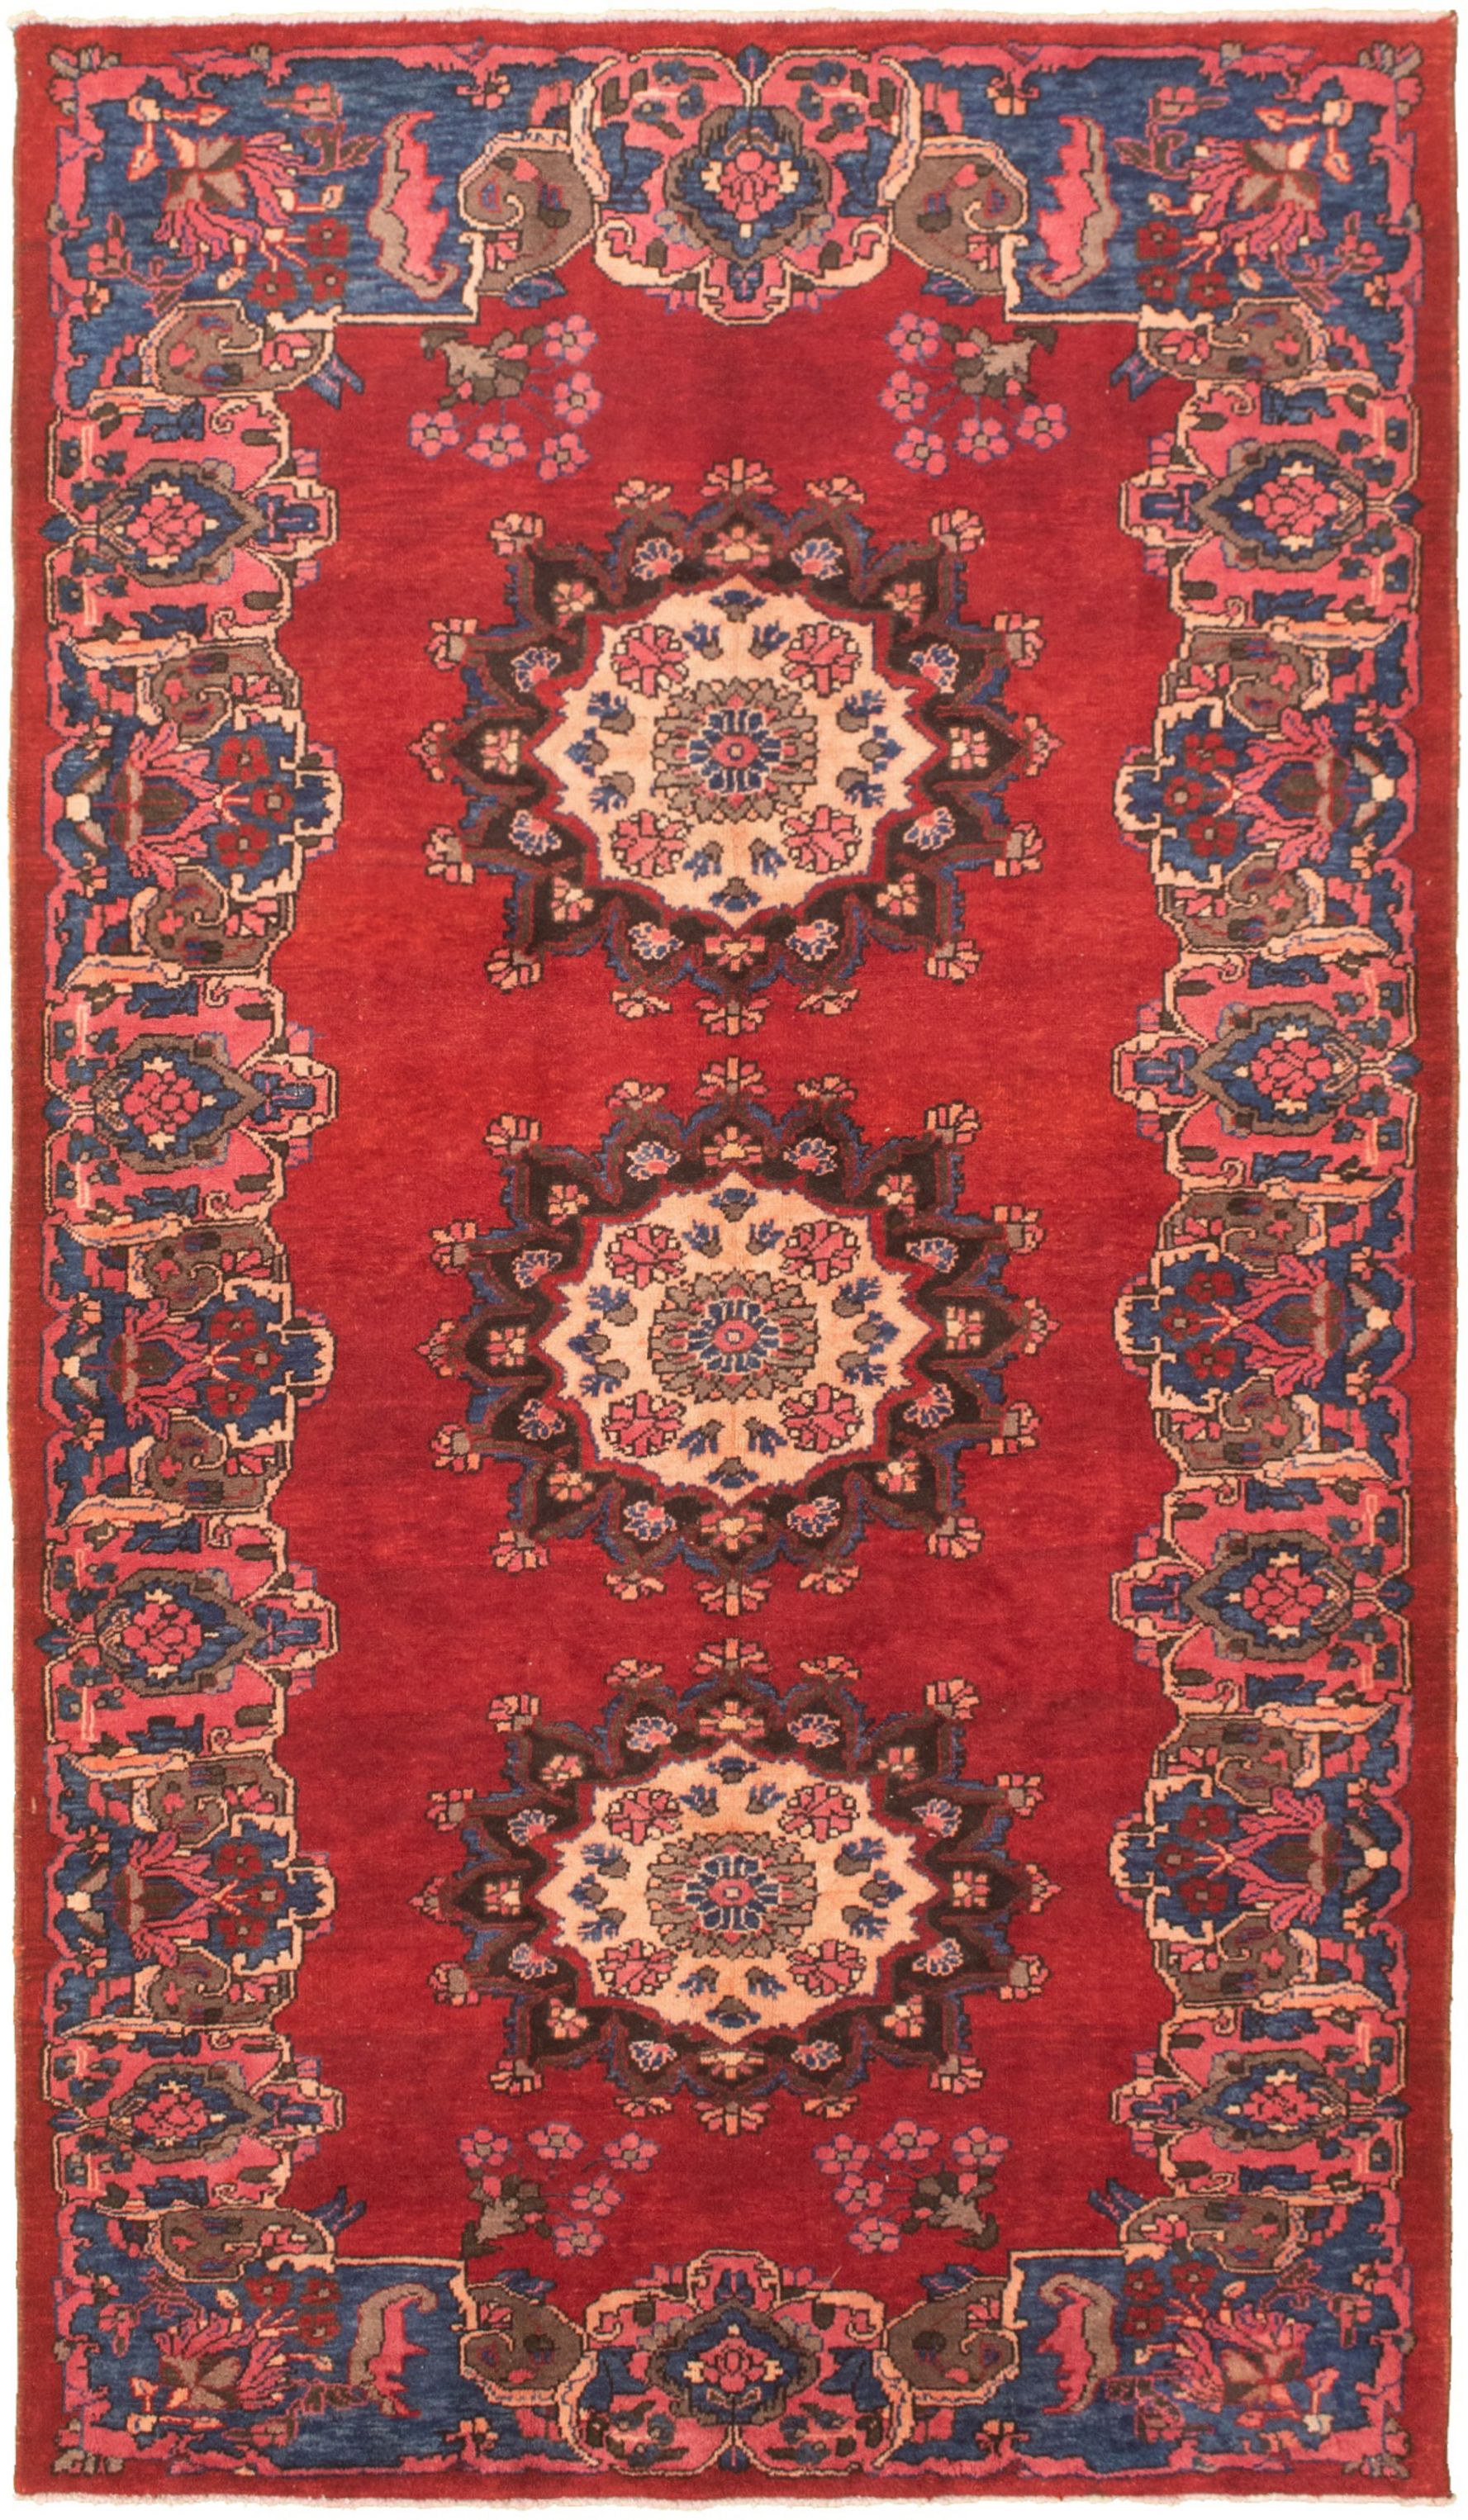 Hand-knotted Authentic Turkish Red Wool Rug 5'3" x 9'6"  Size: 5'3" x 9'6"  